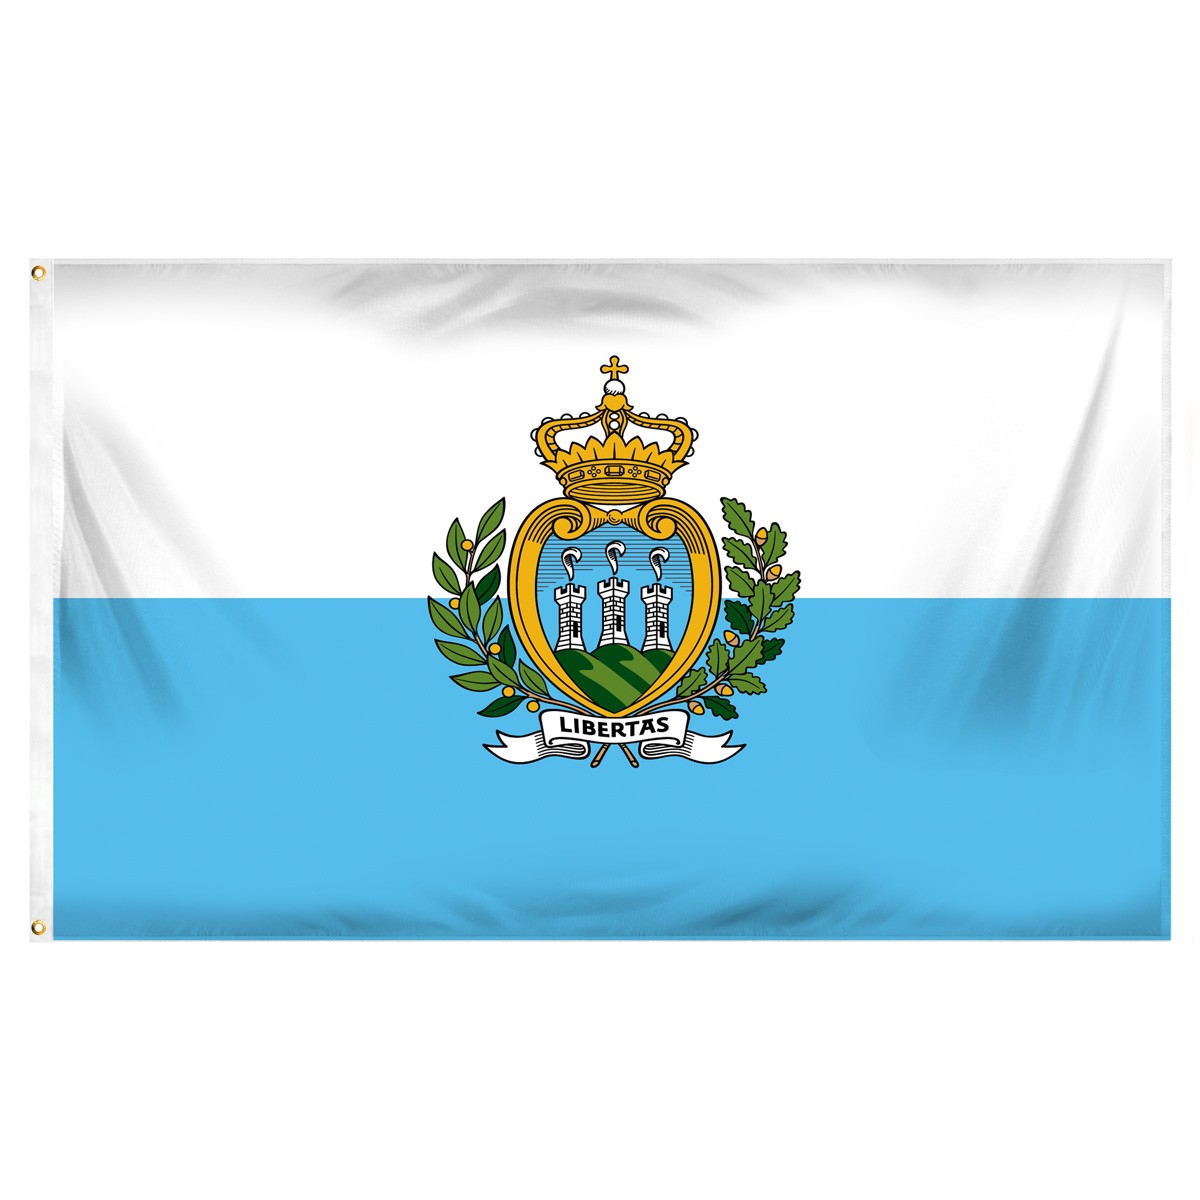 San Marino Building Pennants and Flags